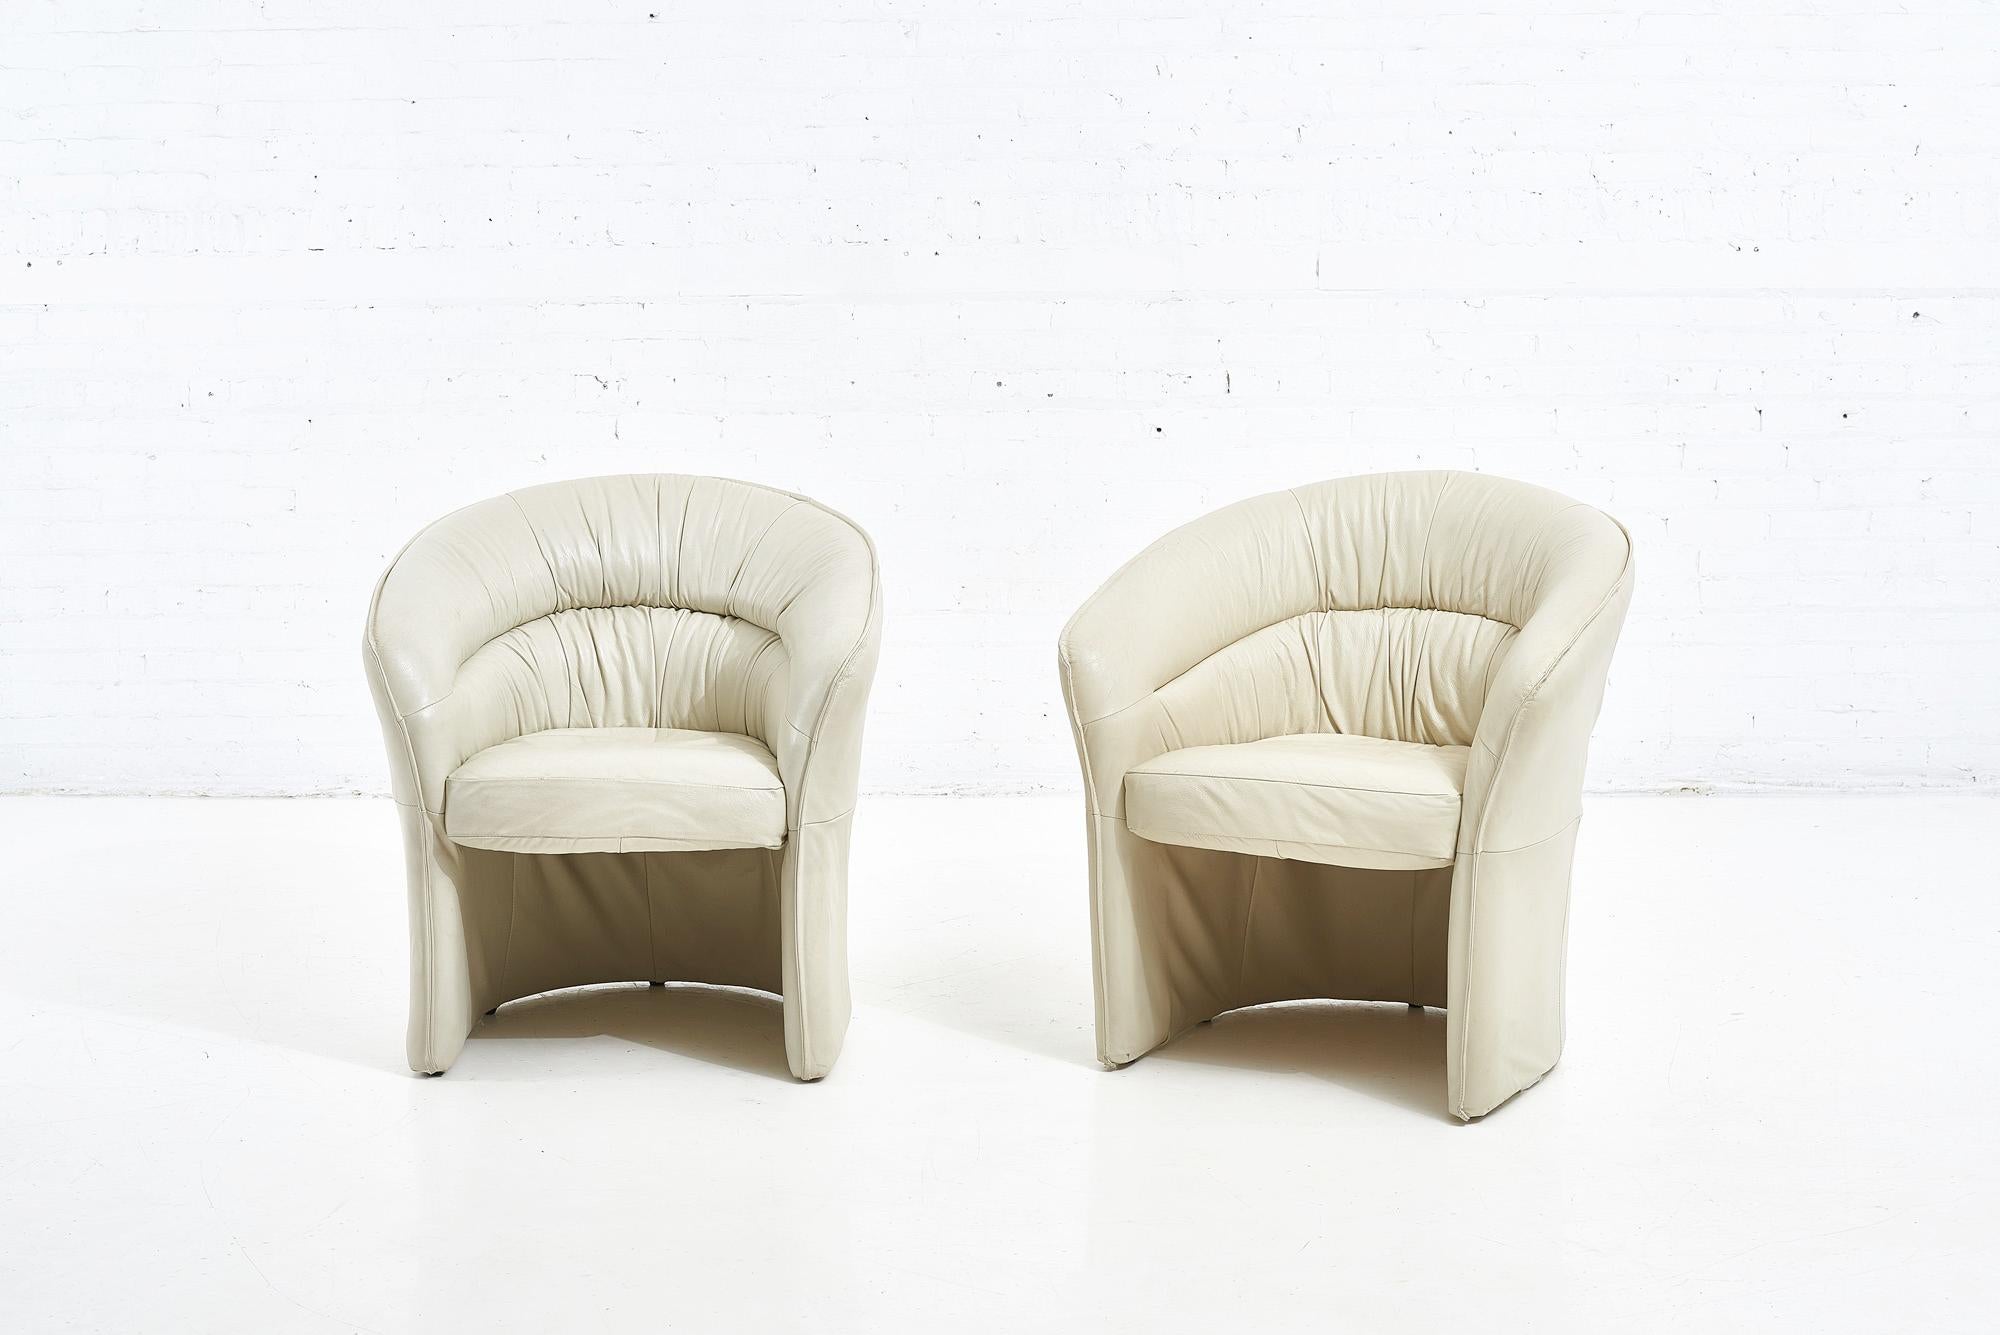 Late 20th Century Italian Leather Barrell Lounge Chairs, 1980